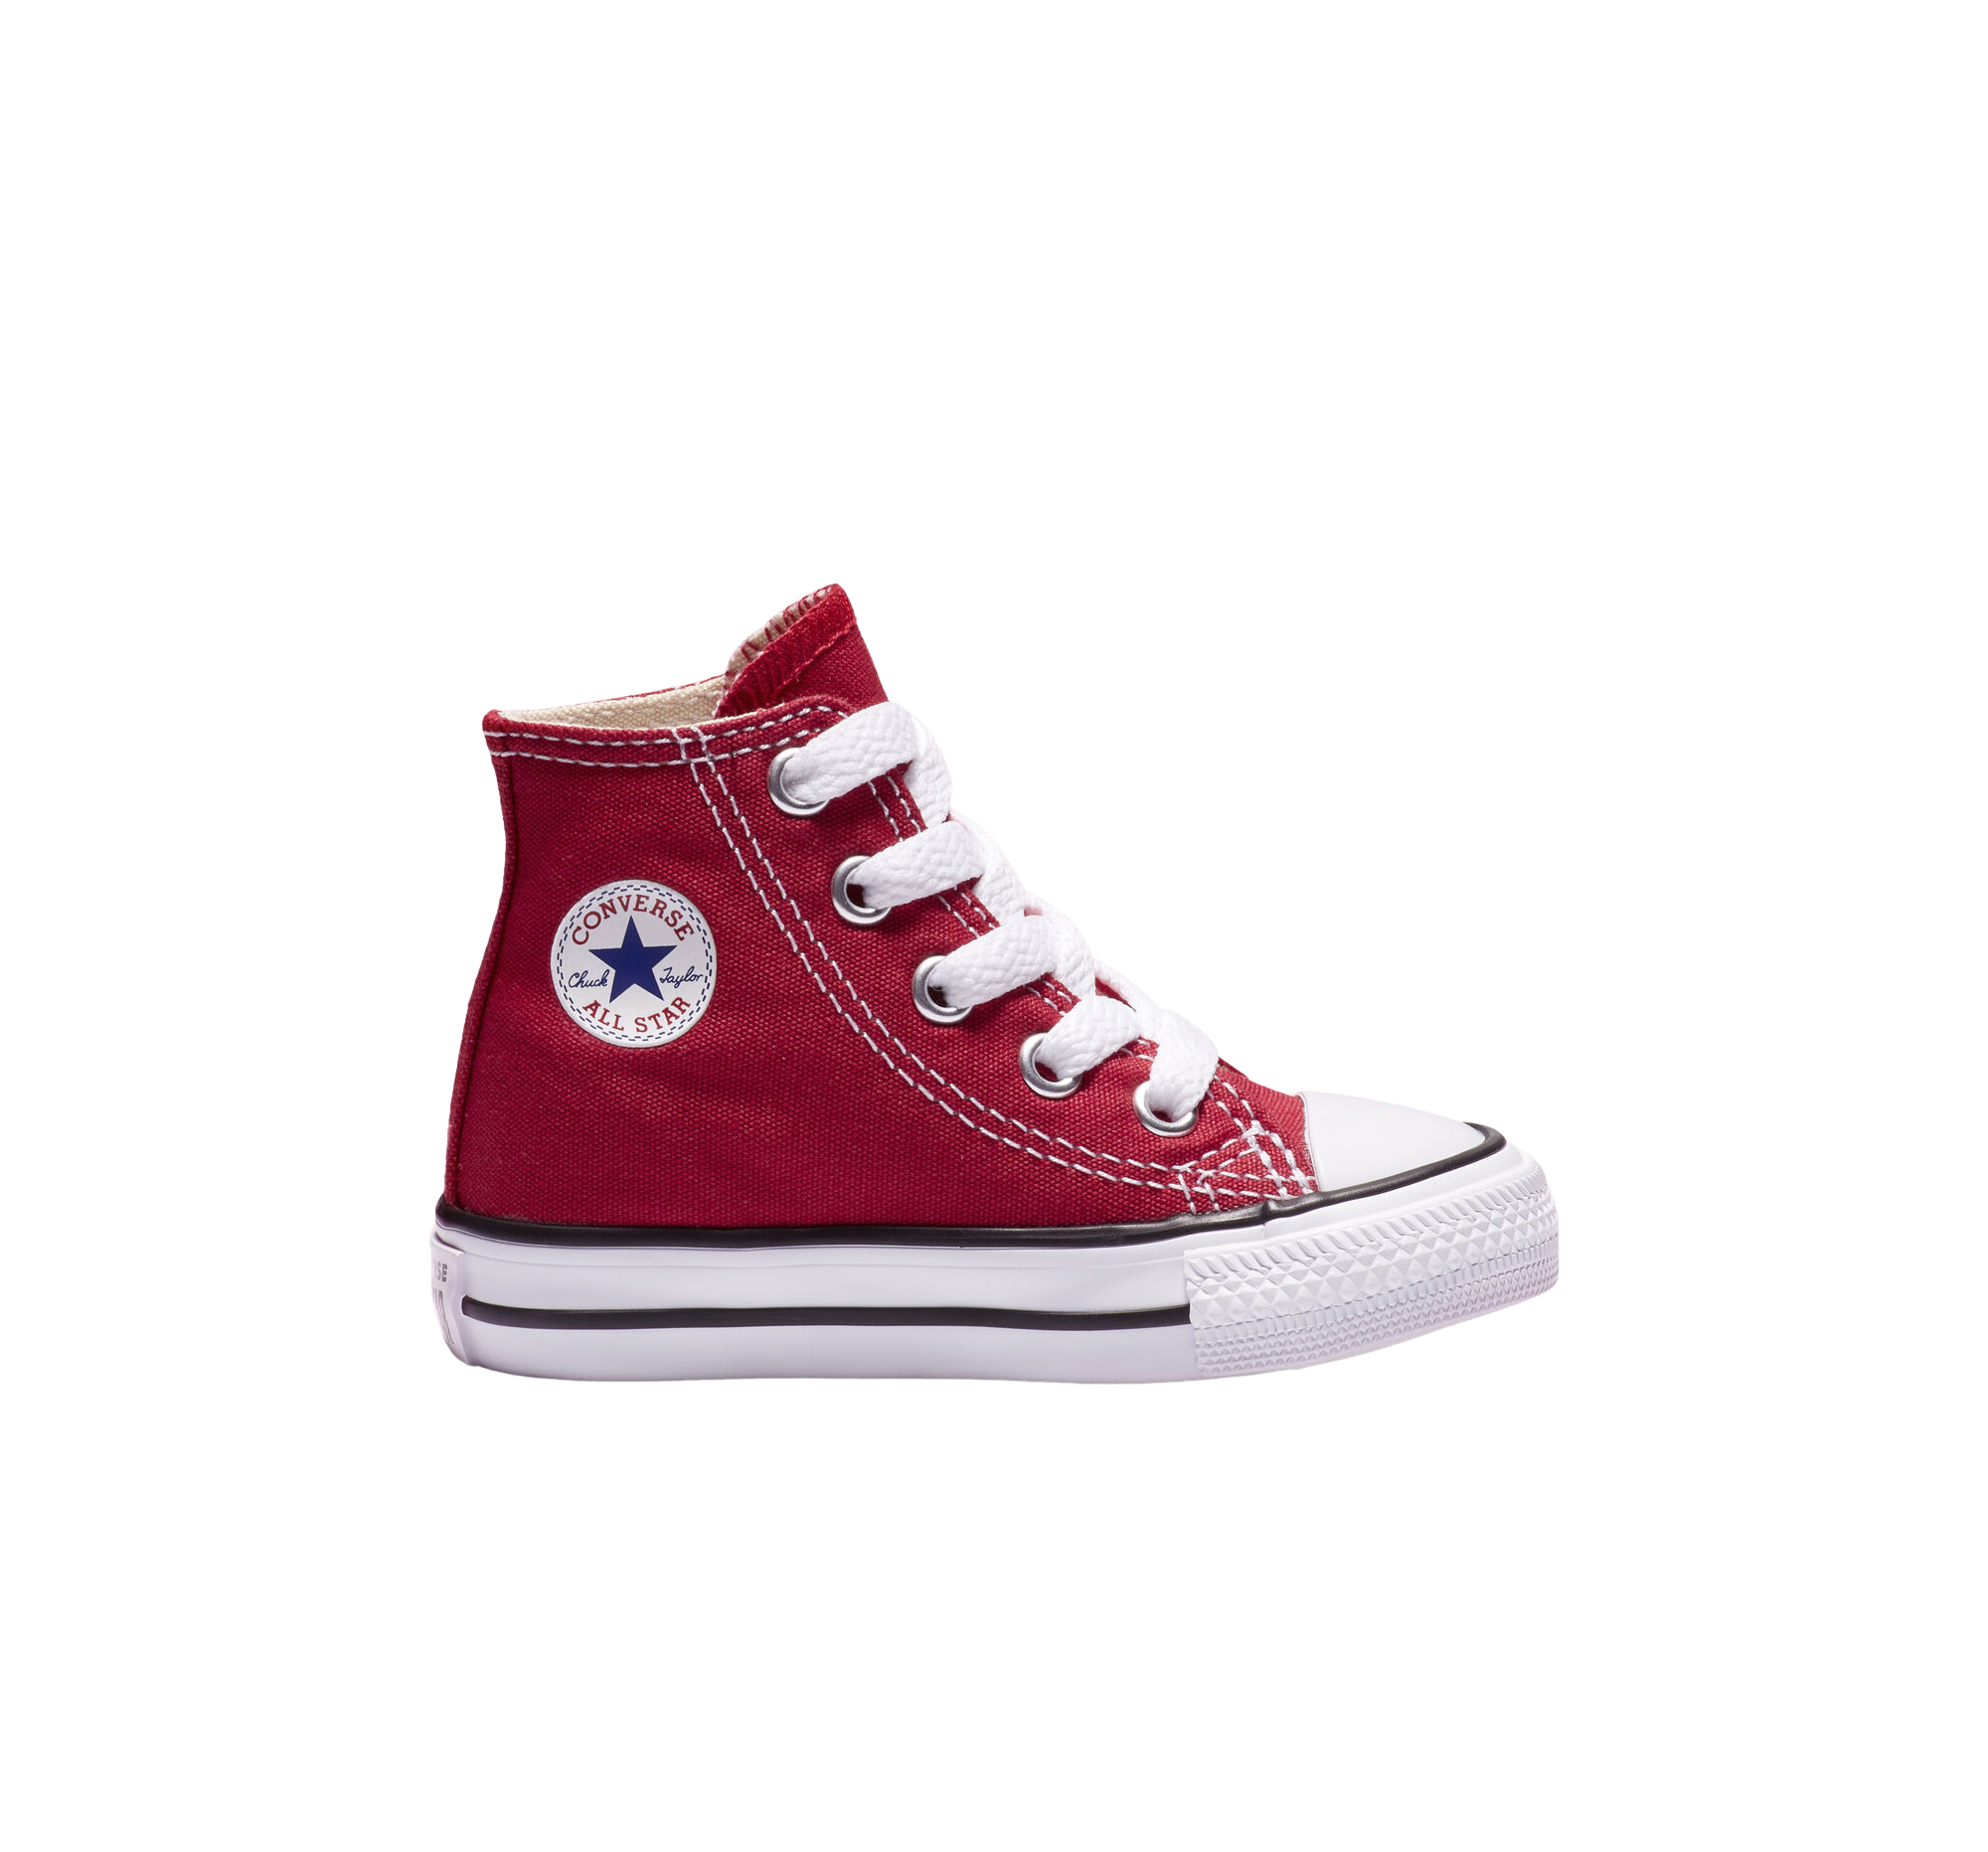 Converse All Star Παιδικό Παπούτσι Red- 3J232C